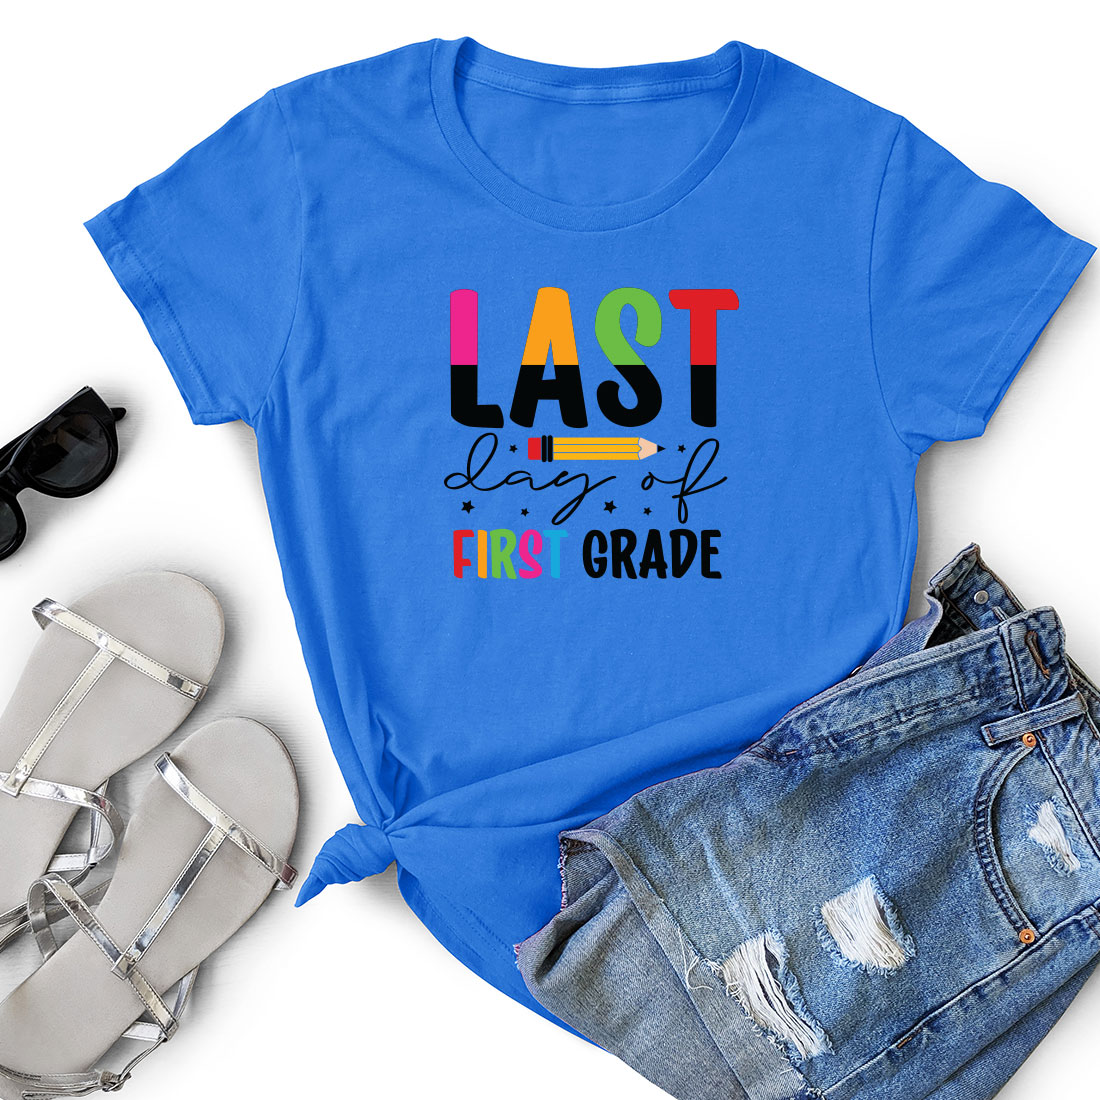 T - shirt that says last day of the grade next to a pair of.